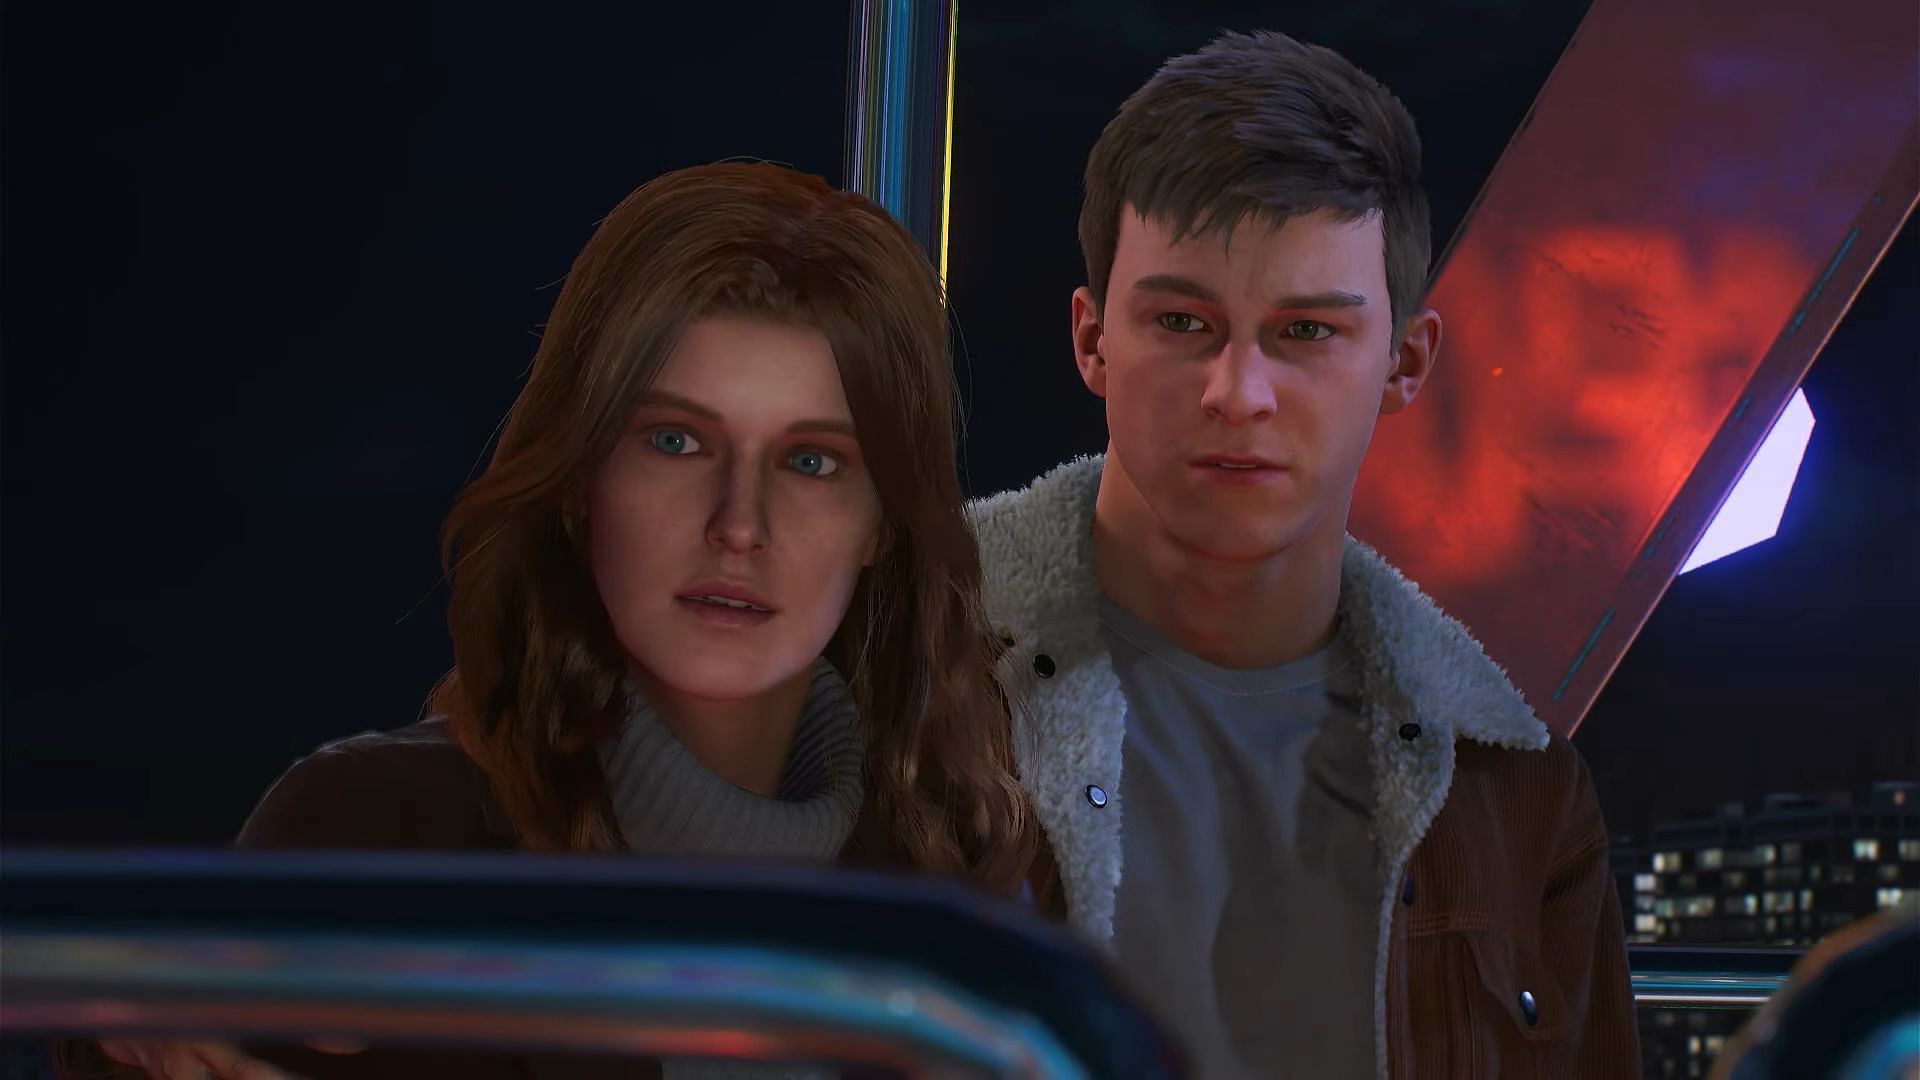 Peter and MJ in the mission (Image via Sony Interactive Entertainment/ WoW Quests on YouTube)